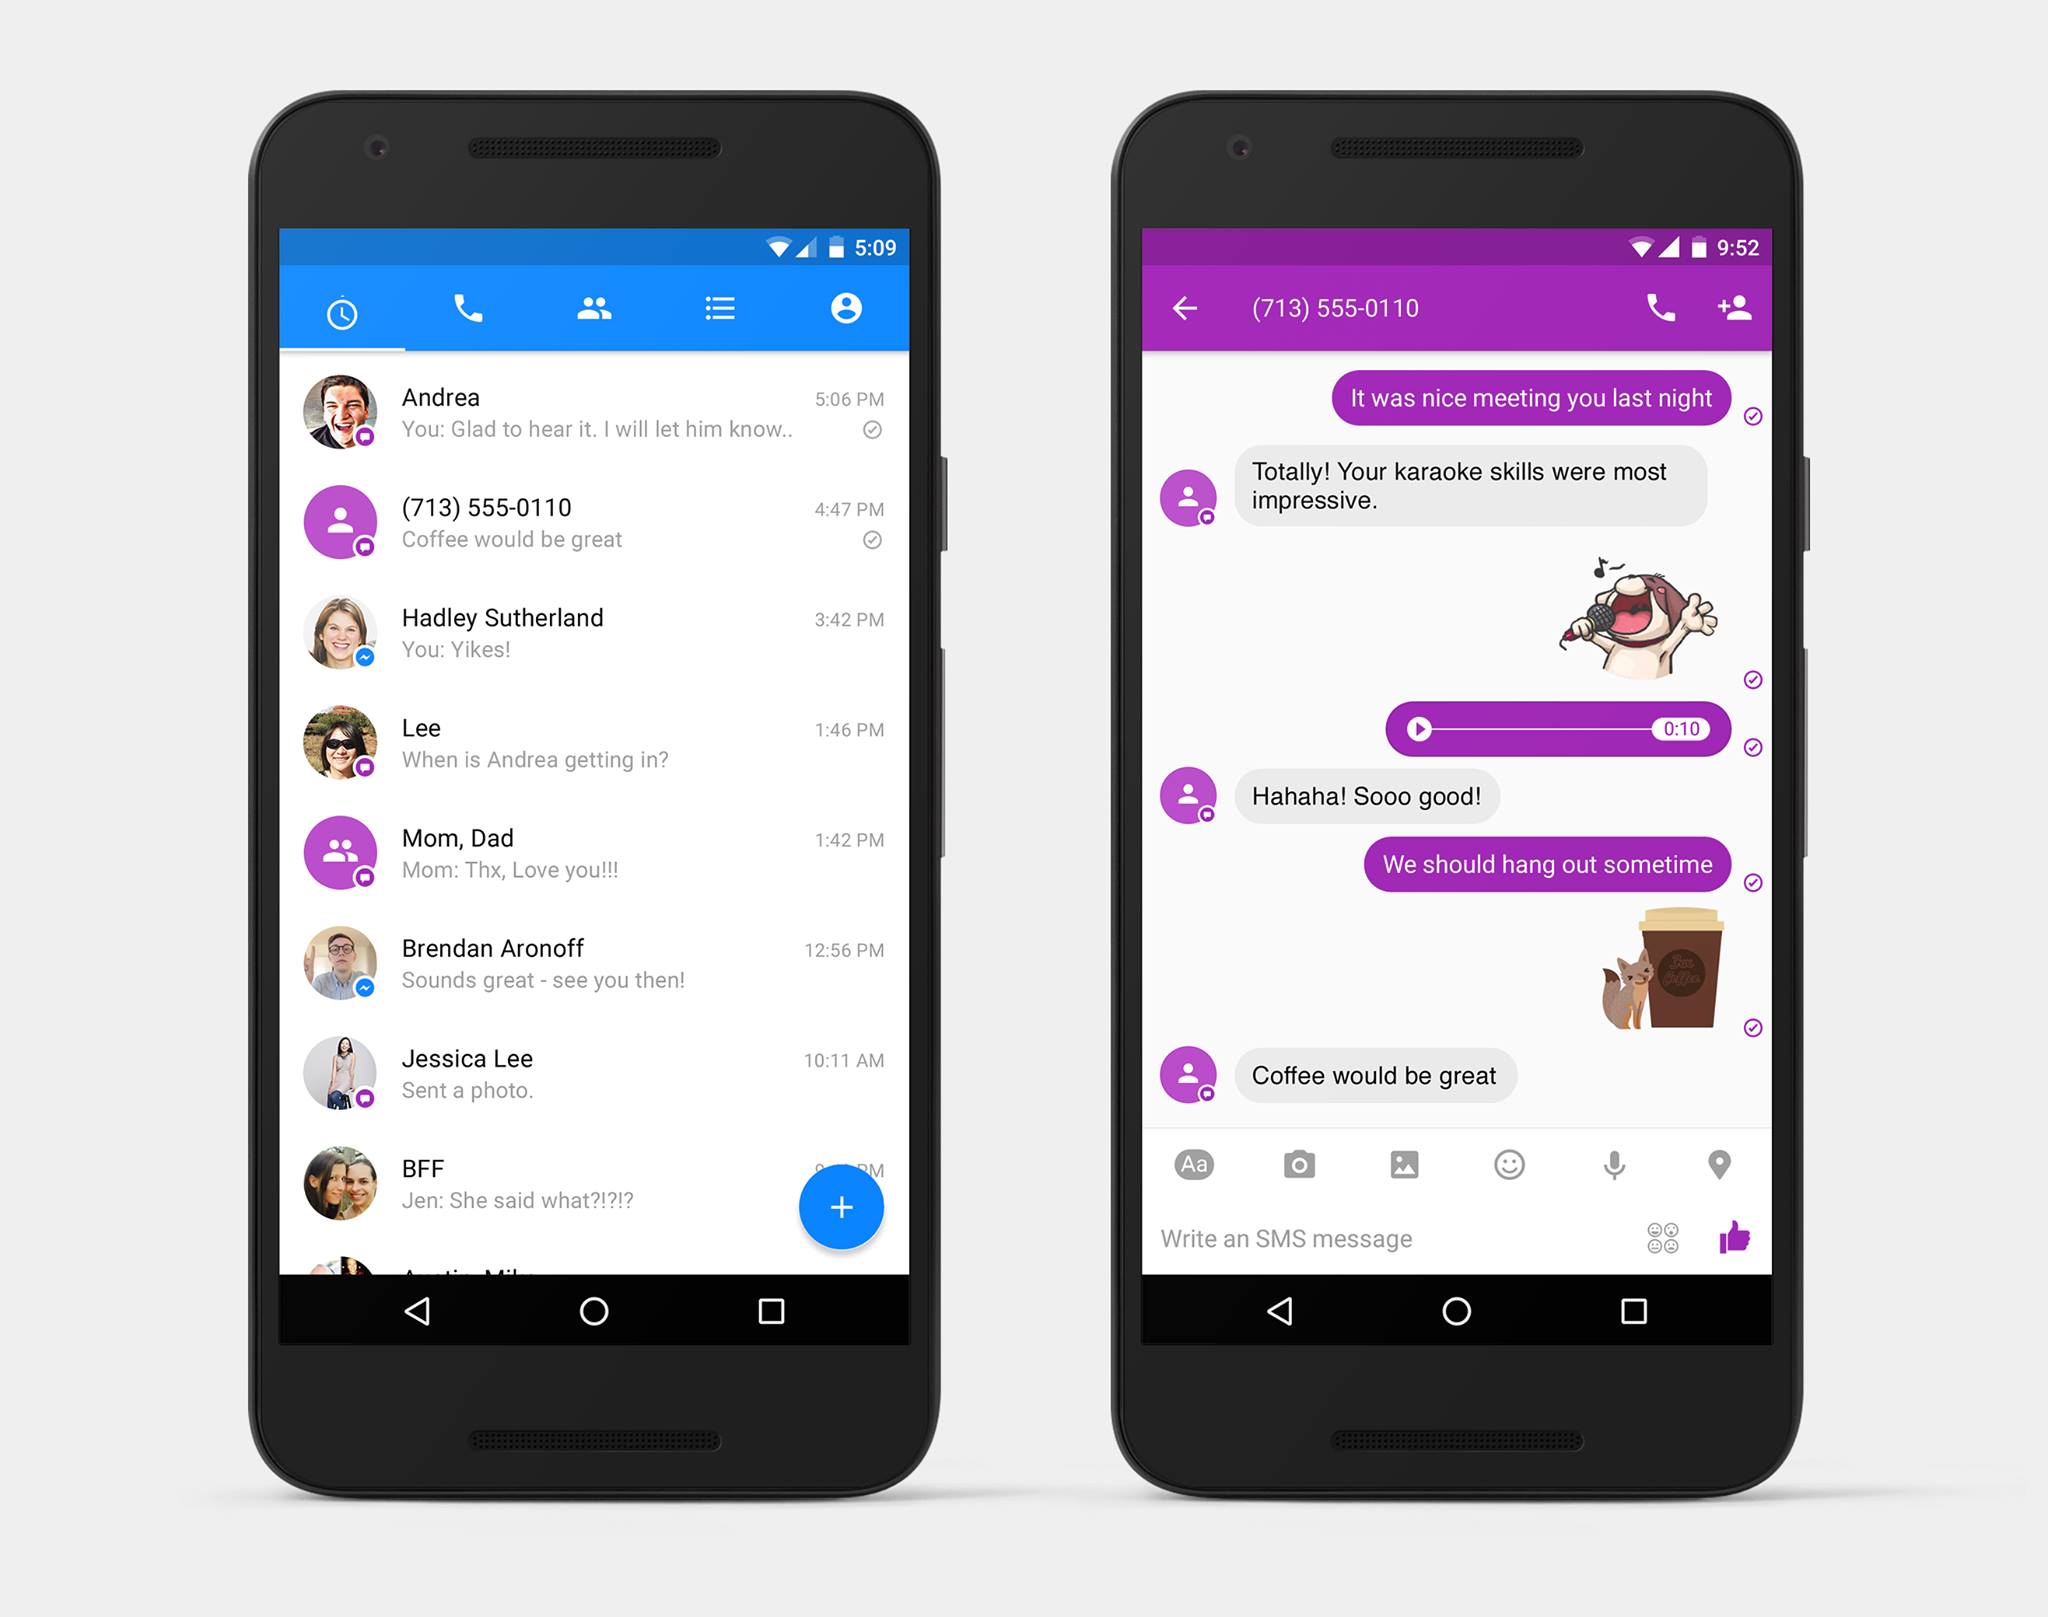 Facebook Messenger now lets you send and receive text messages